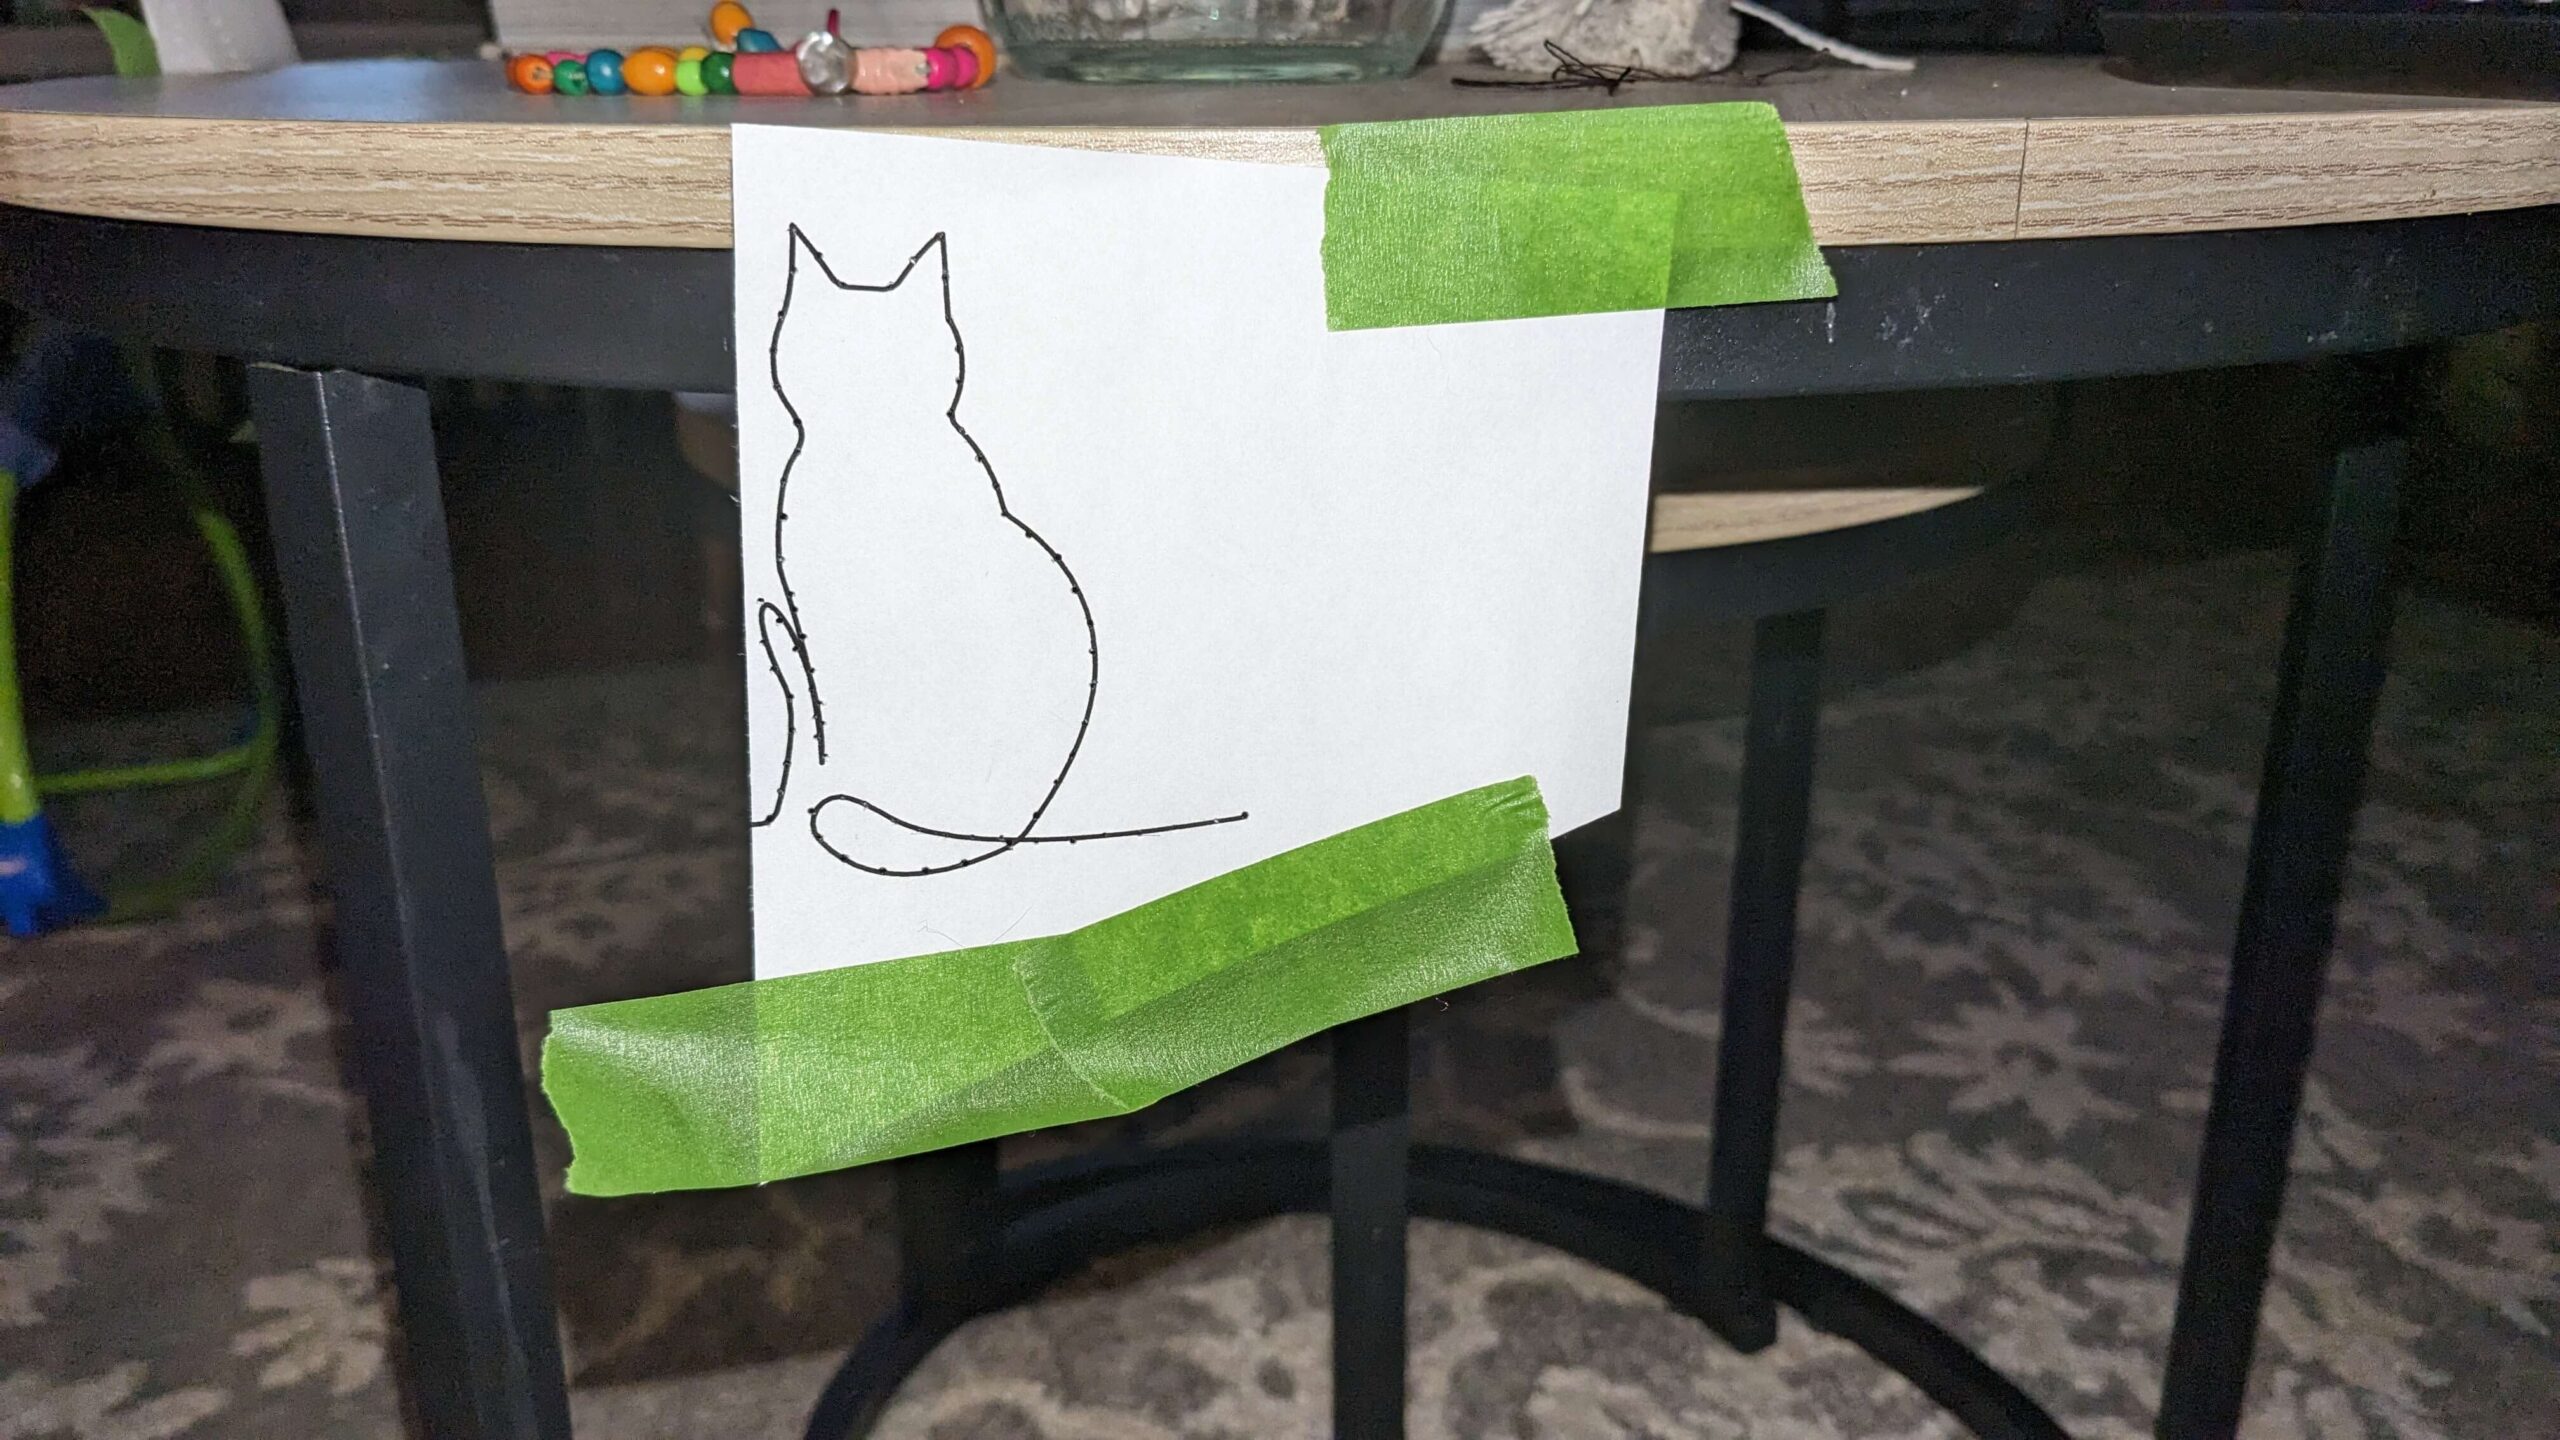 cat line art picture taped to a table with green painters tape with small holes